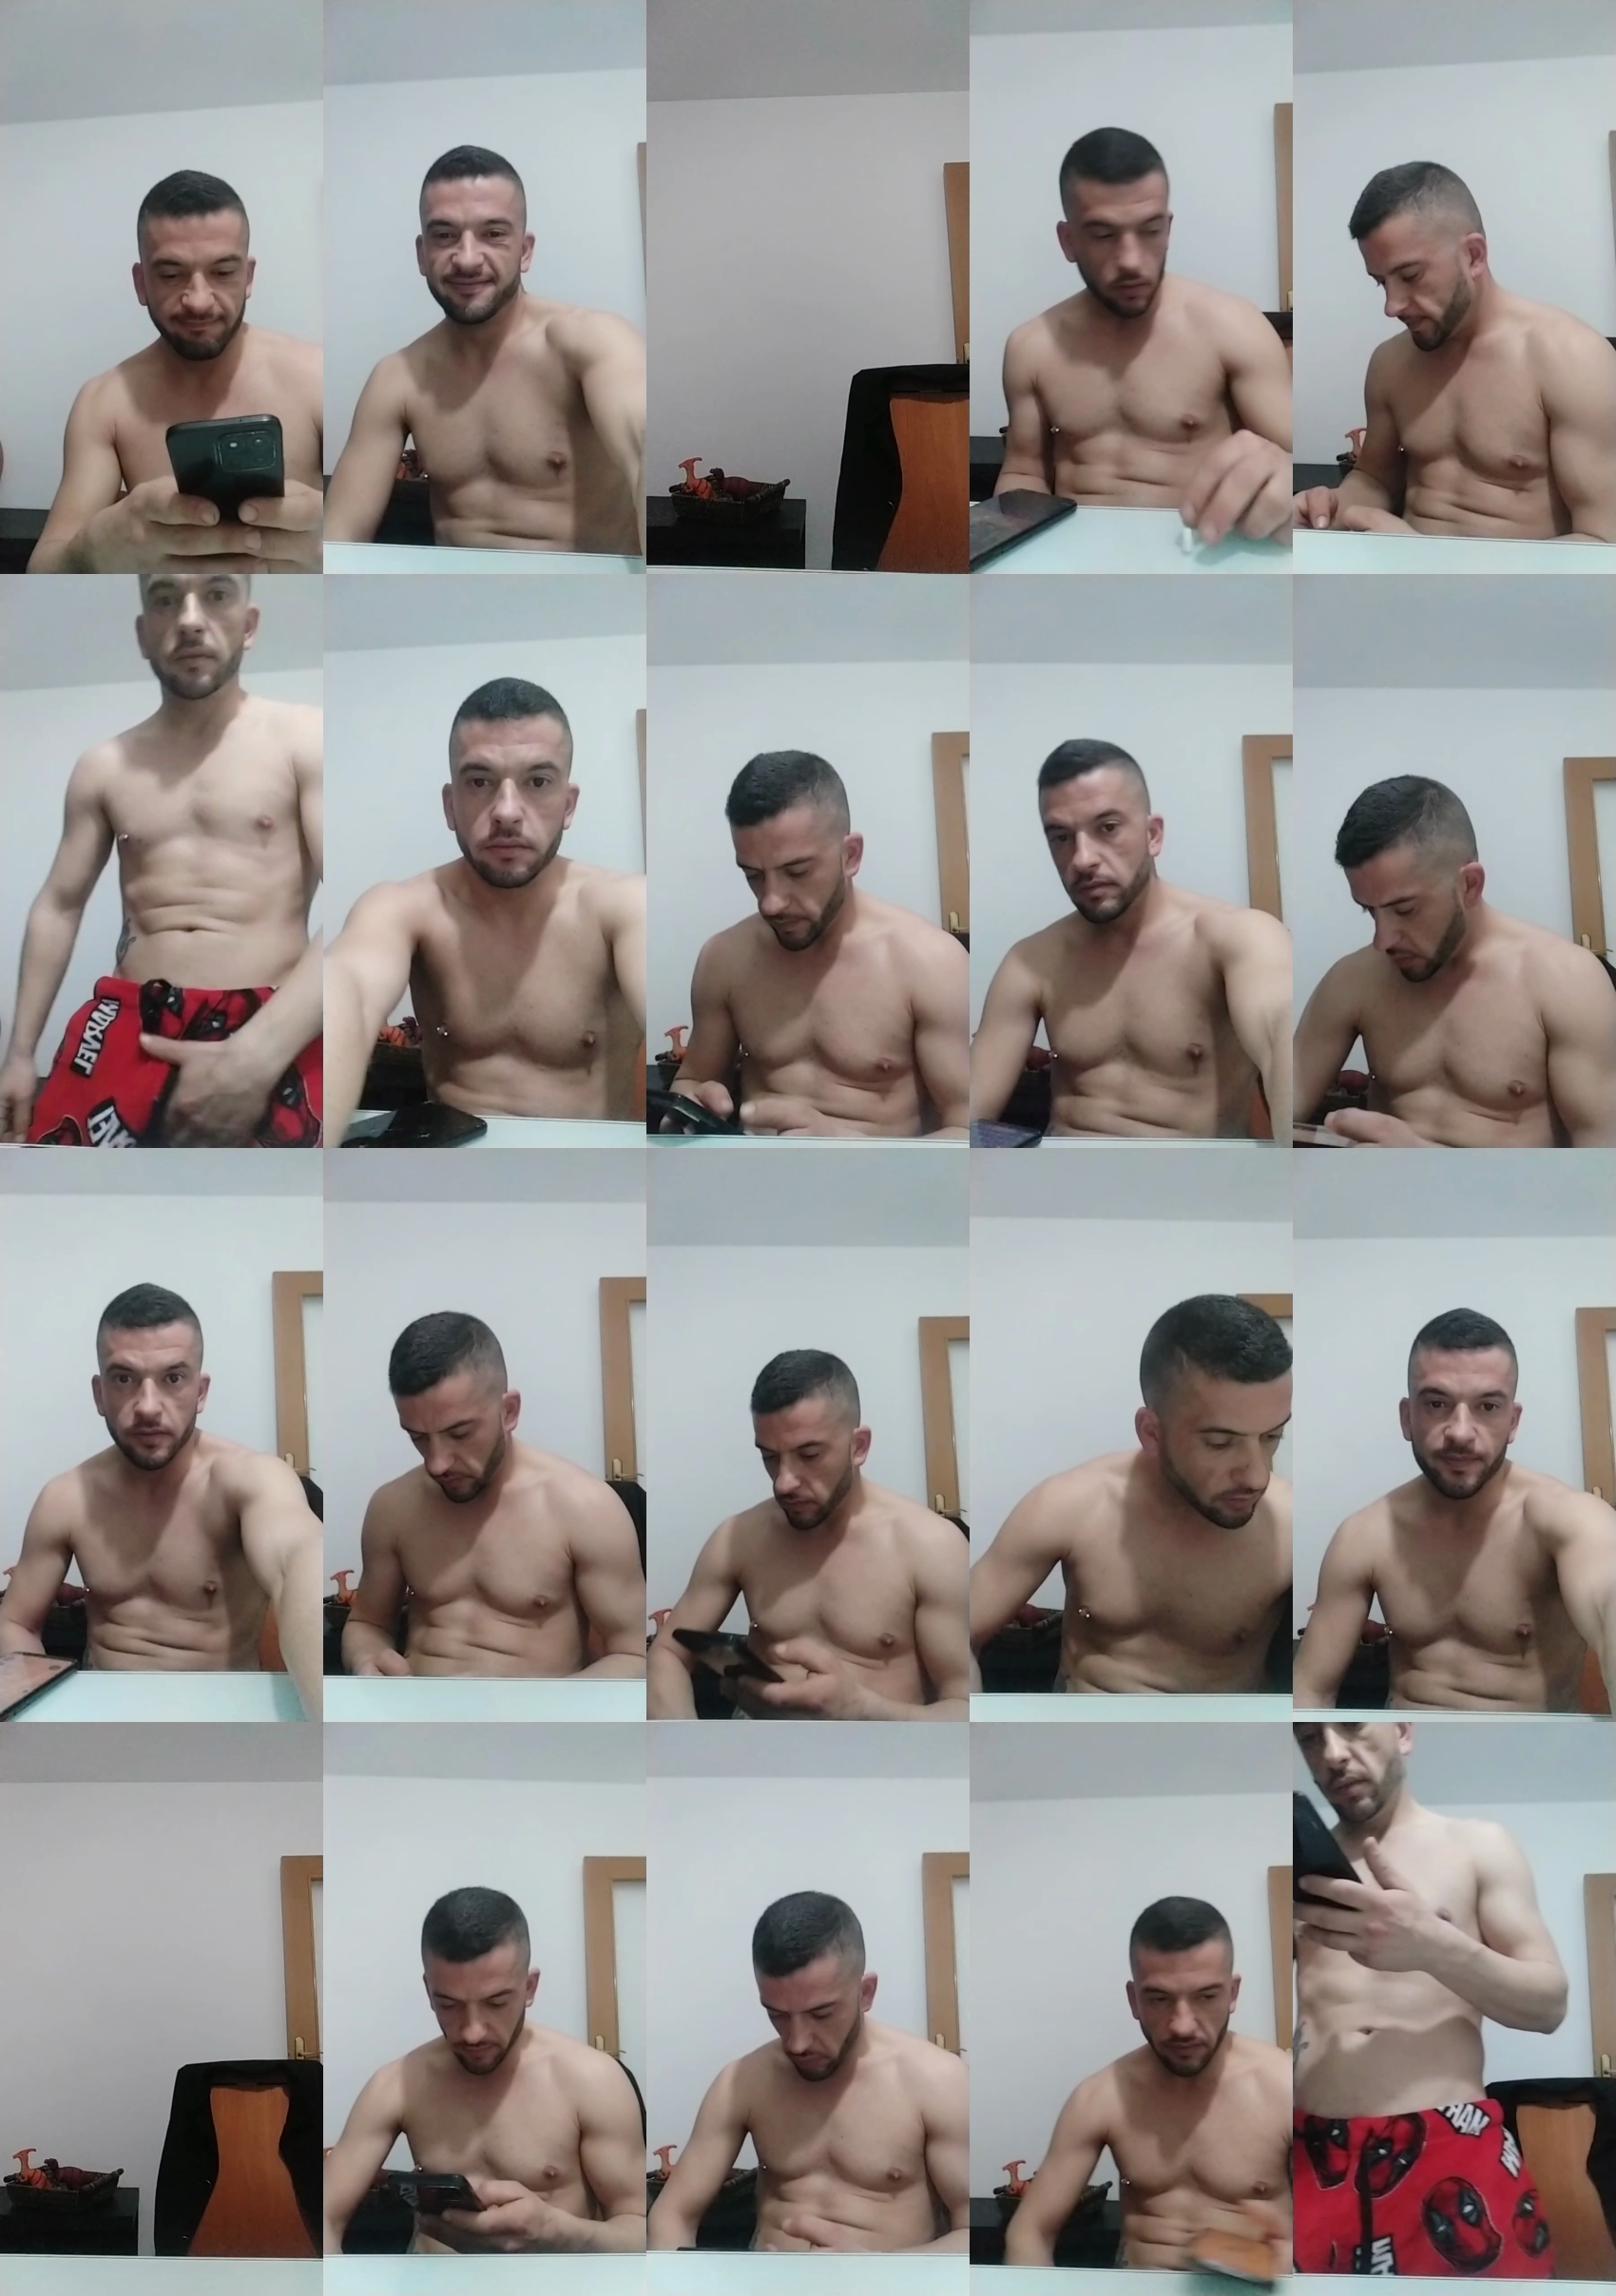 Kevinbcn85 27-01-2024 Recorded Video Topless